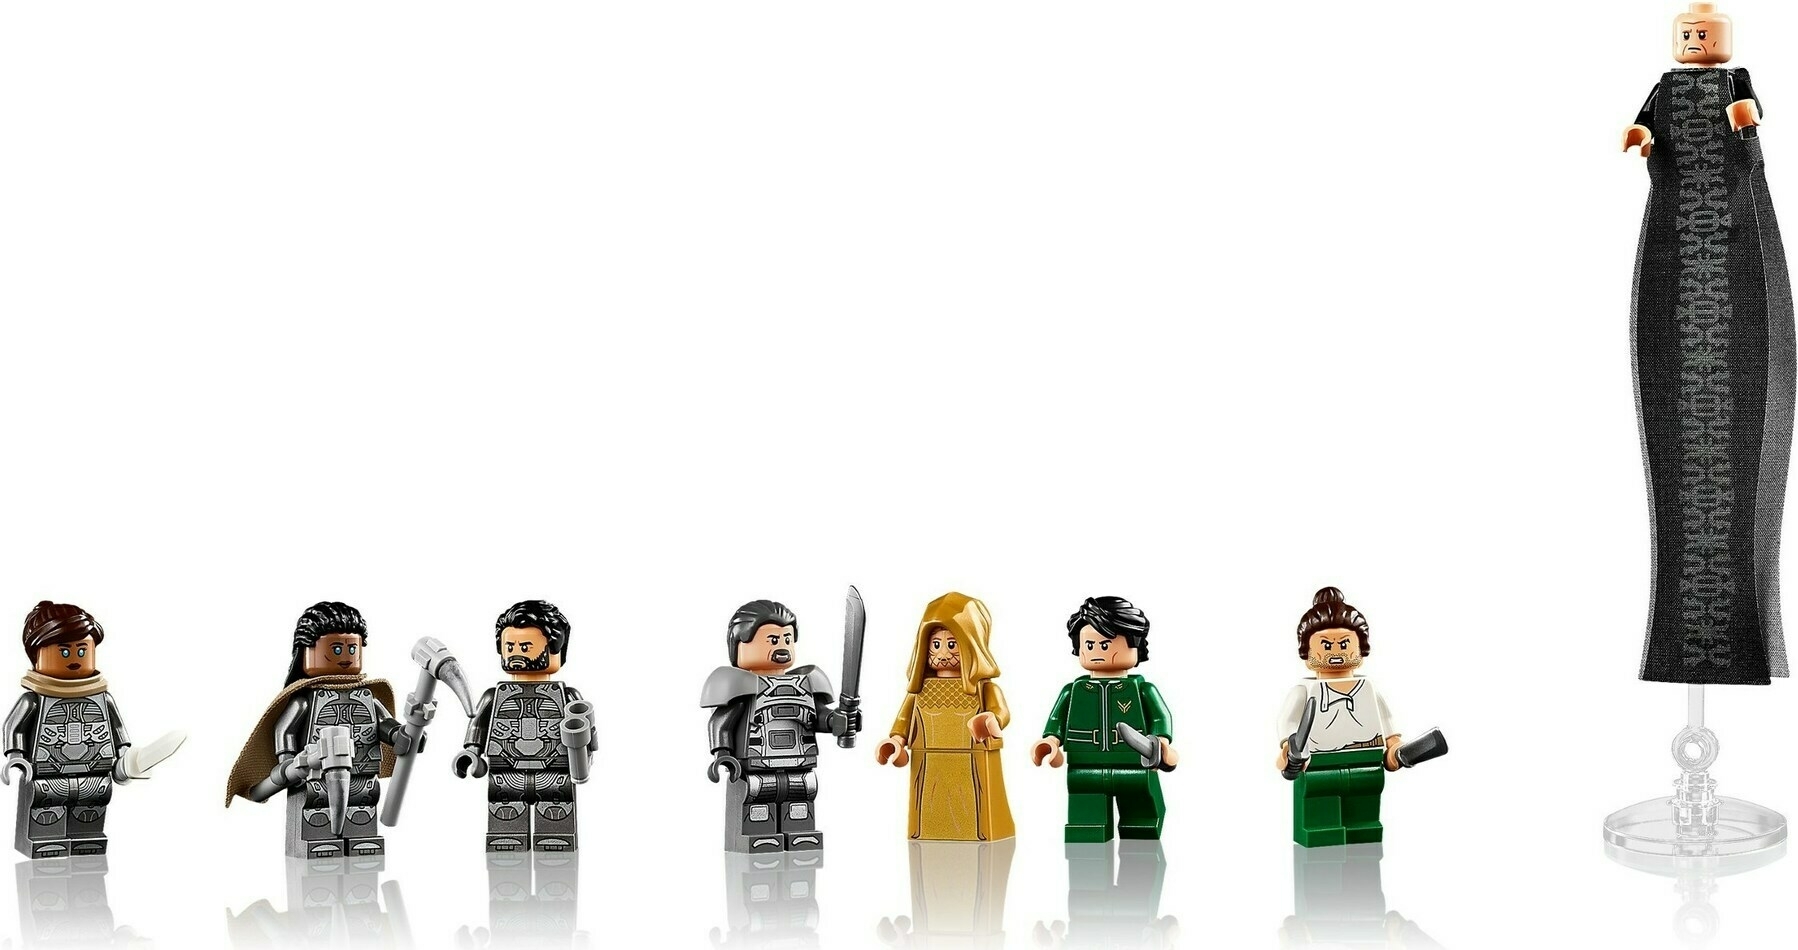 DUNE LEGO Mini Figures, including a Baron Harkonnen mini-figure which appears to be 10 times taller than the rest.